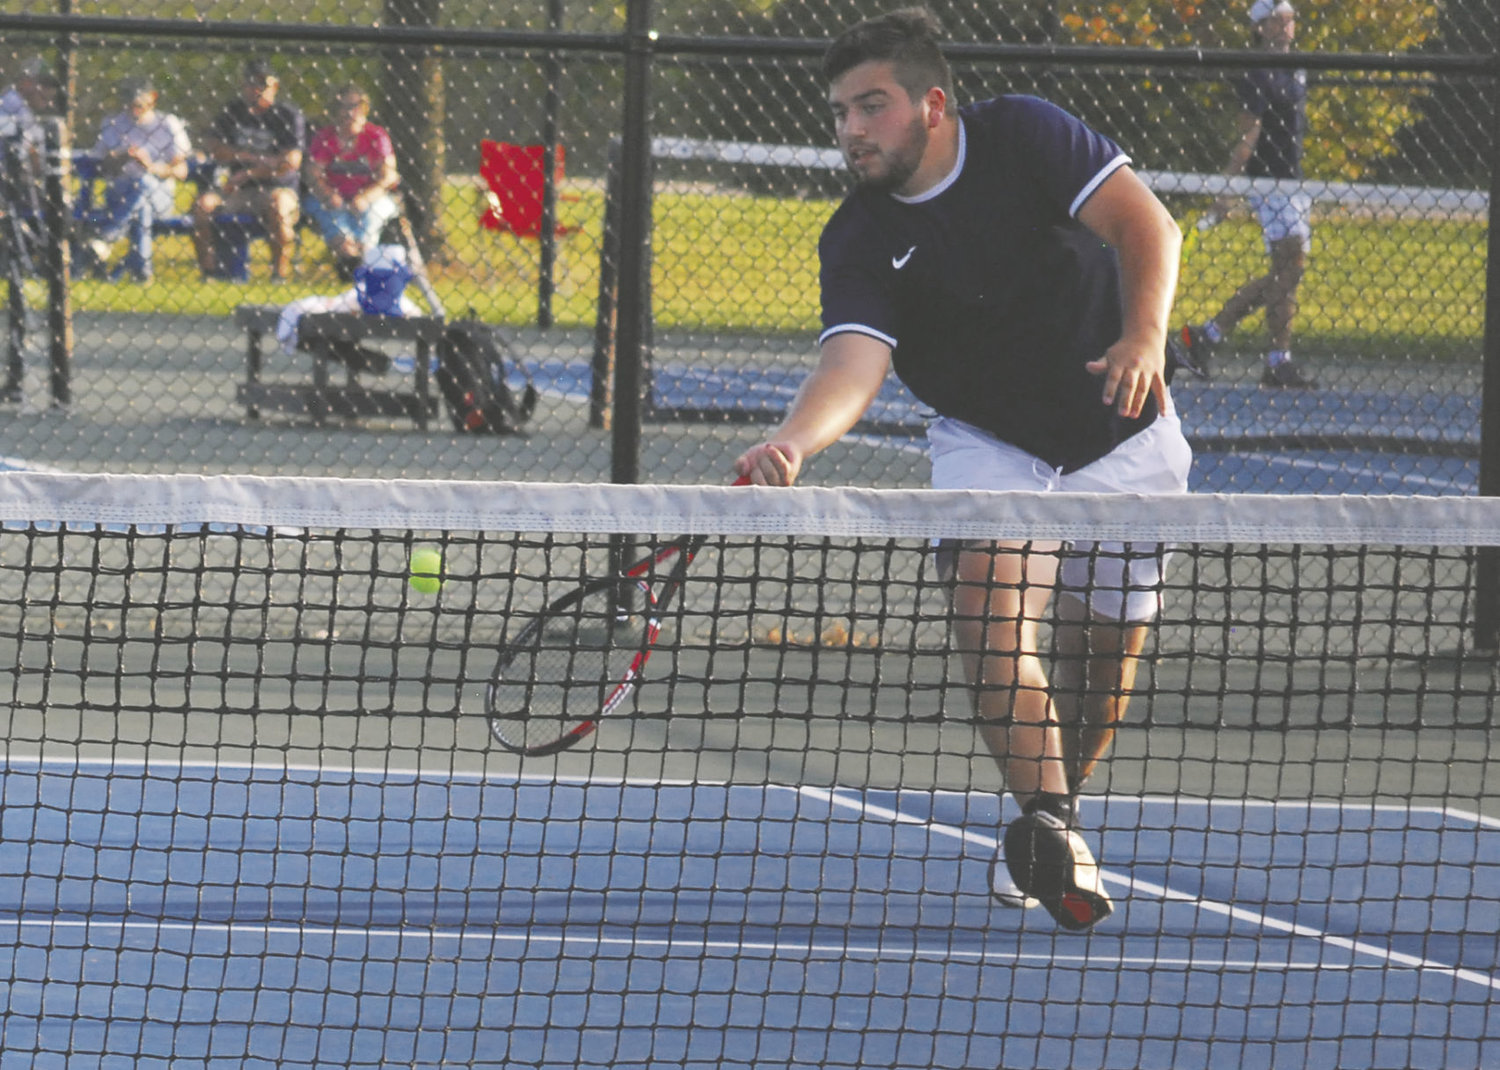 Fountain Central senior Denton Otero and double's partner Jacob Keeling fell 6-4, 7-5 to Covington's Myles and Nolan Potter in the Wabash River Conference double's semifinals on Monday evening.